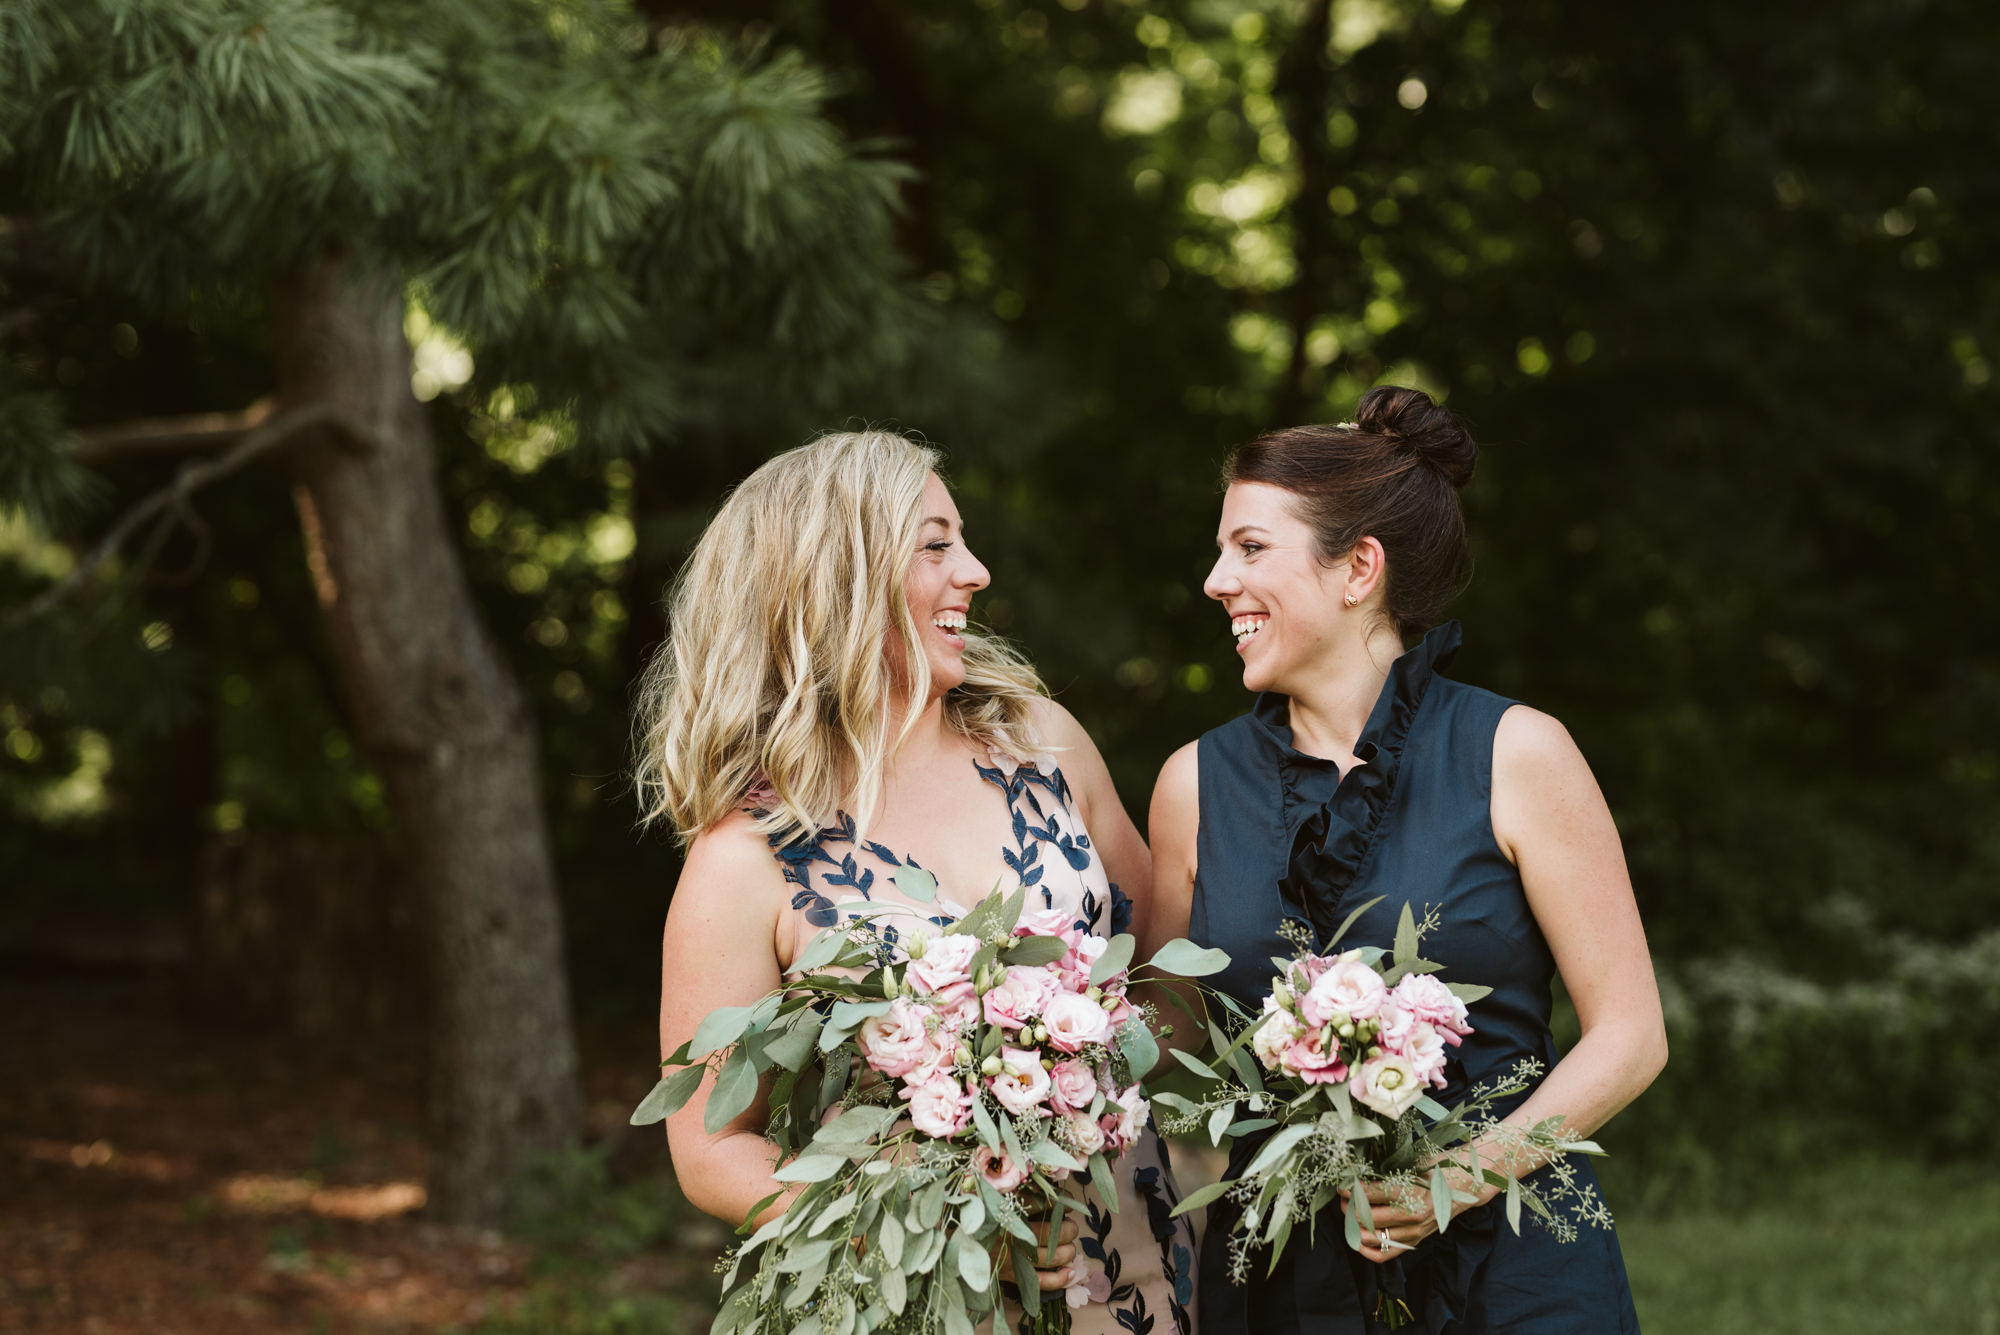 Outdoor Wedding, Casual, Simple, Lake Roland, Baltimore, Maryland Wedding Photographer, Laid Back, DIY Flowers, Bouquet with Eucalyptus and Lisianthus, September, Bride and Maid of Honor Laughing